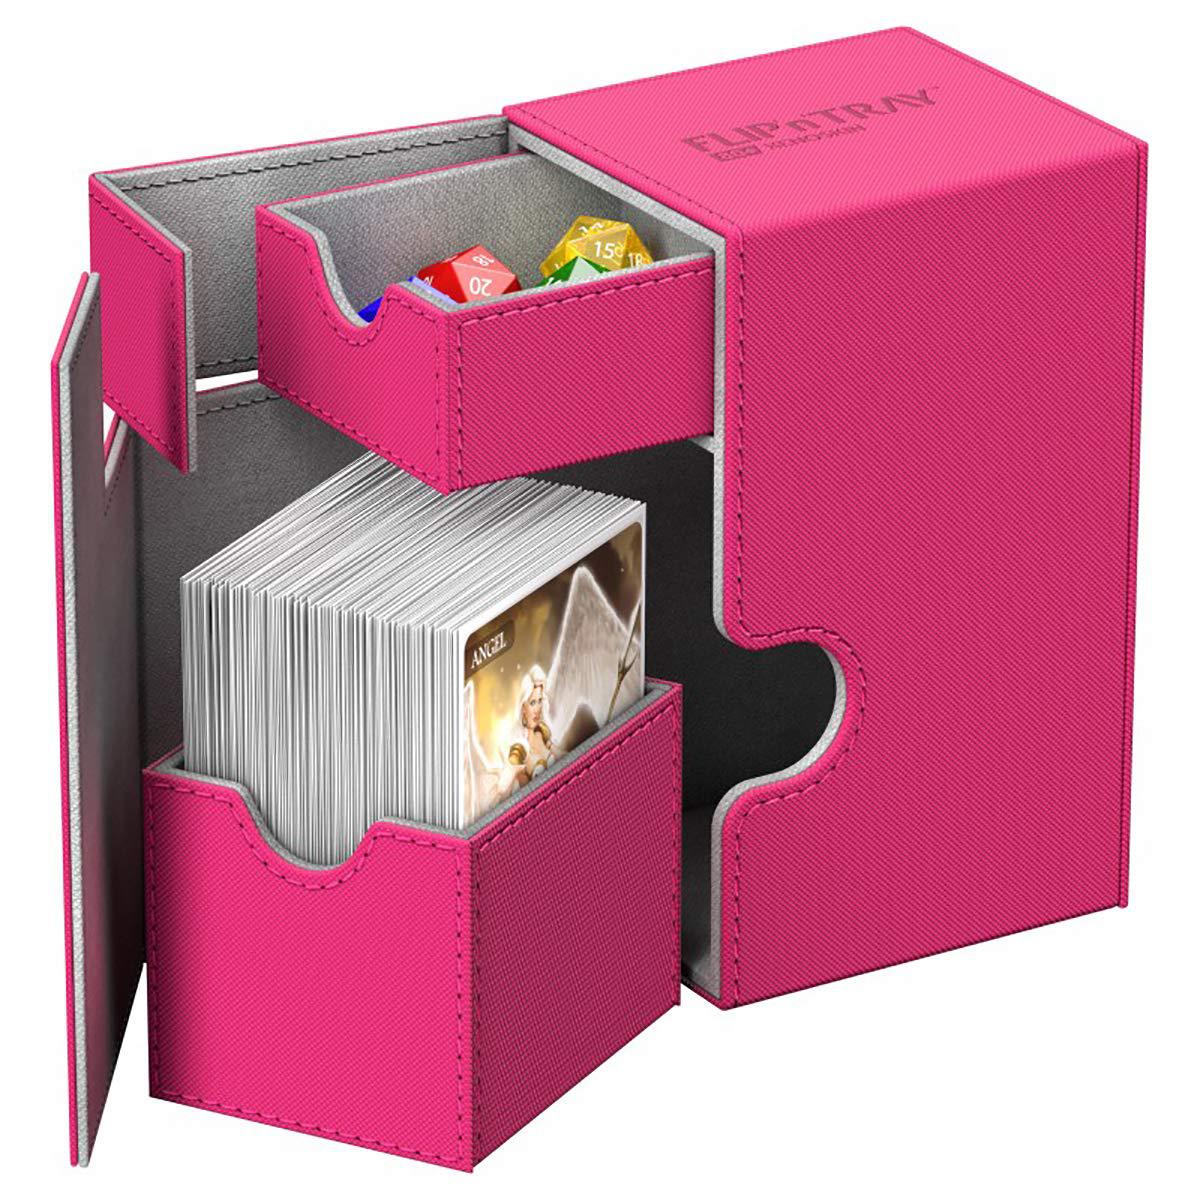 ultimate guard flip 'n' tray 80+, deck case for 80 double-sleeved tcg cards + dice tray, pink/grey, independent magnetic clos